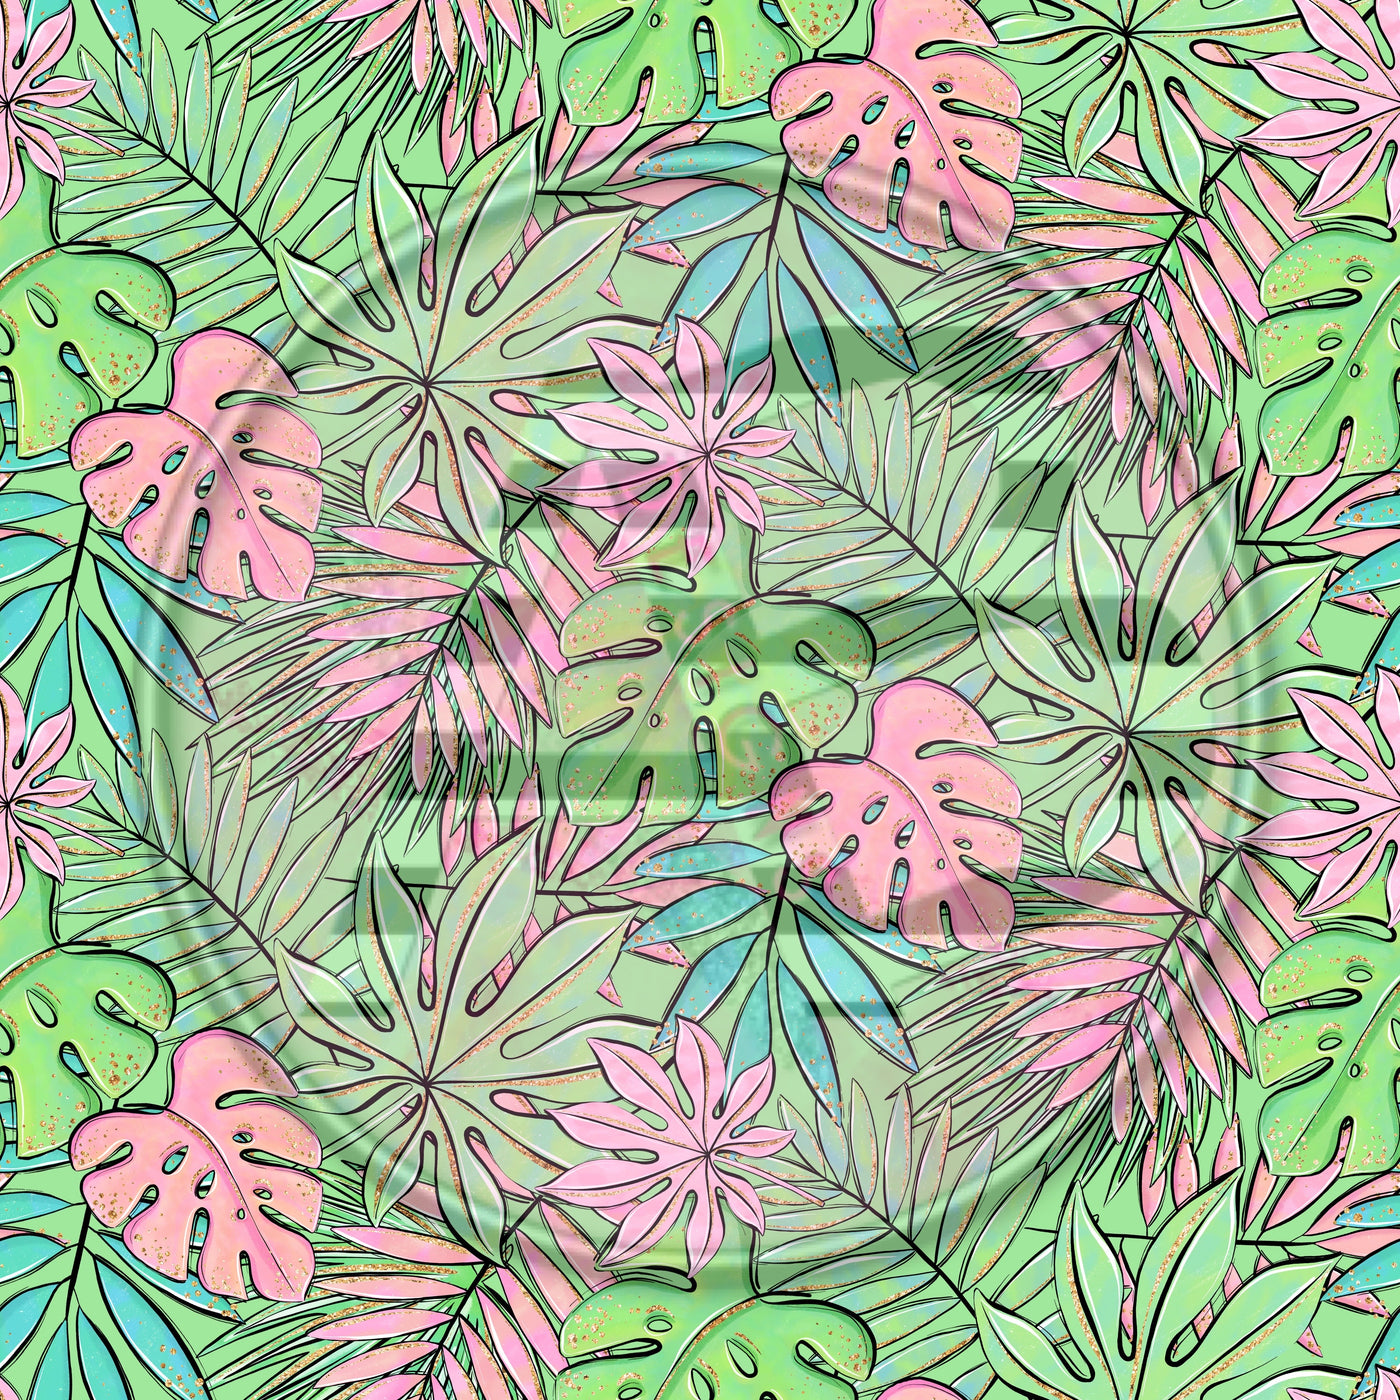 Adhesive Patterned Vinyl - Tropical 690